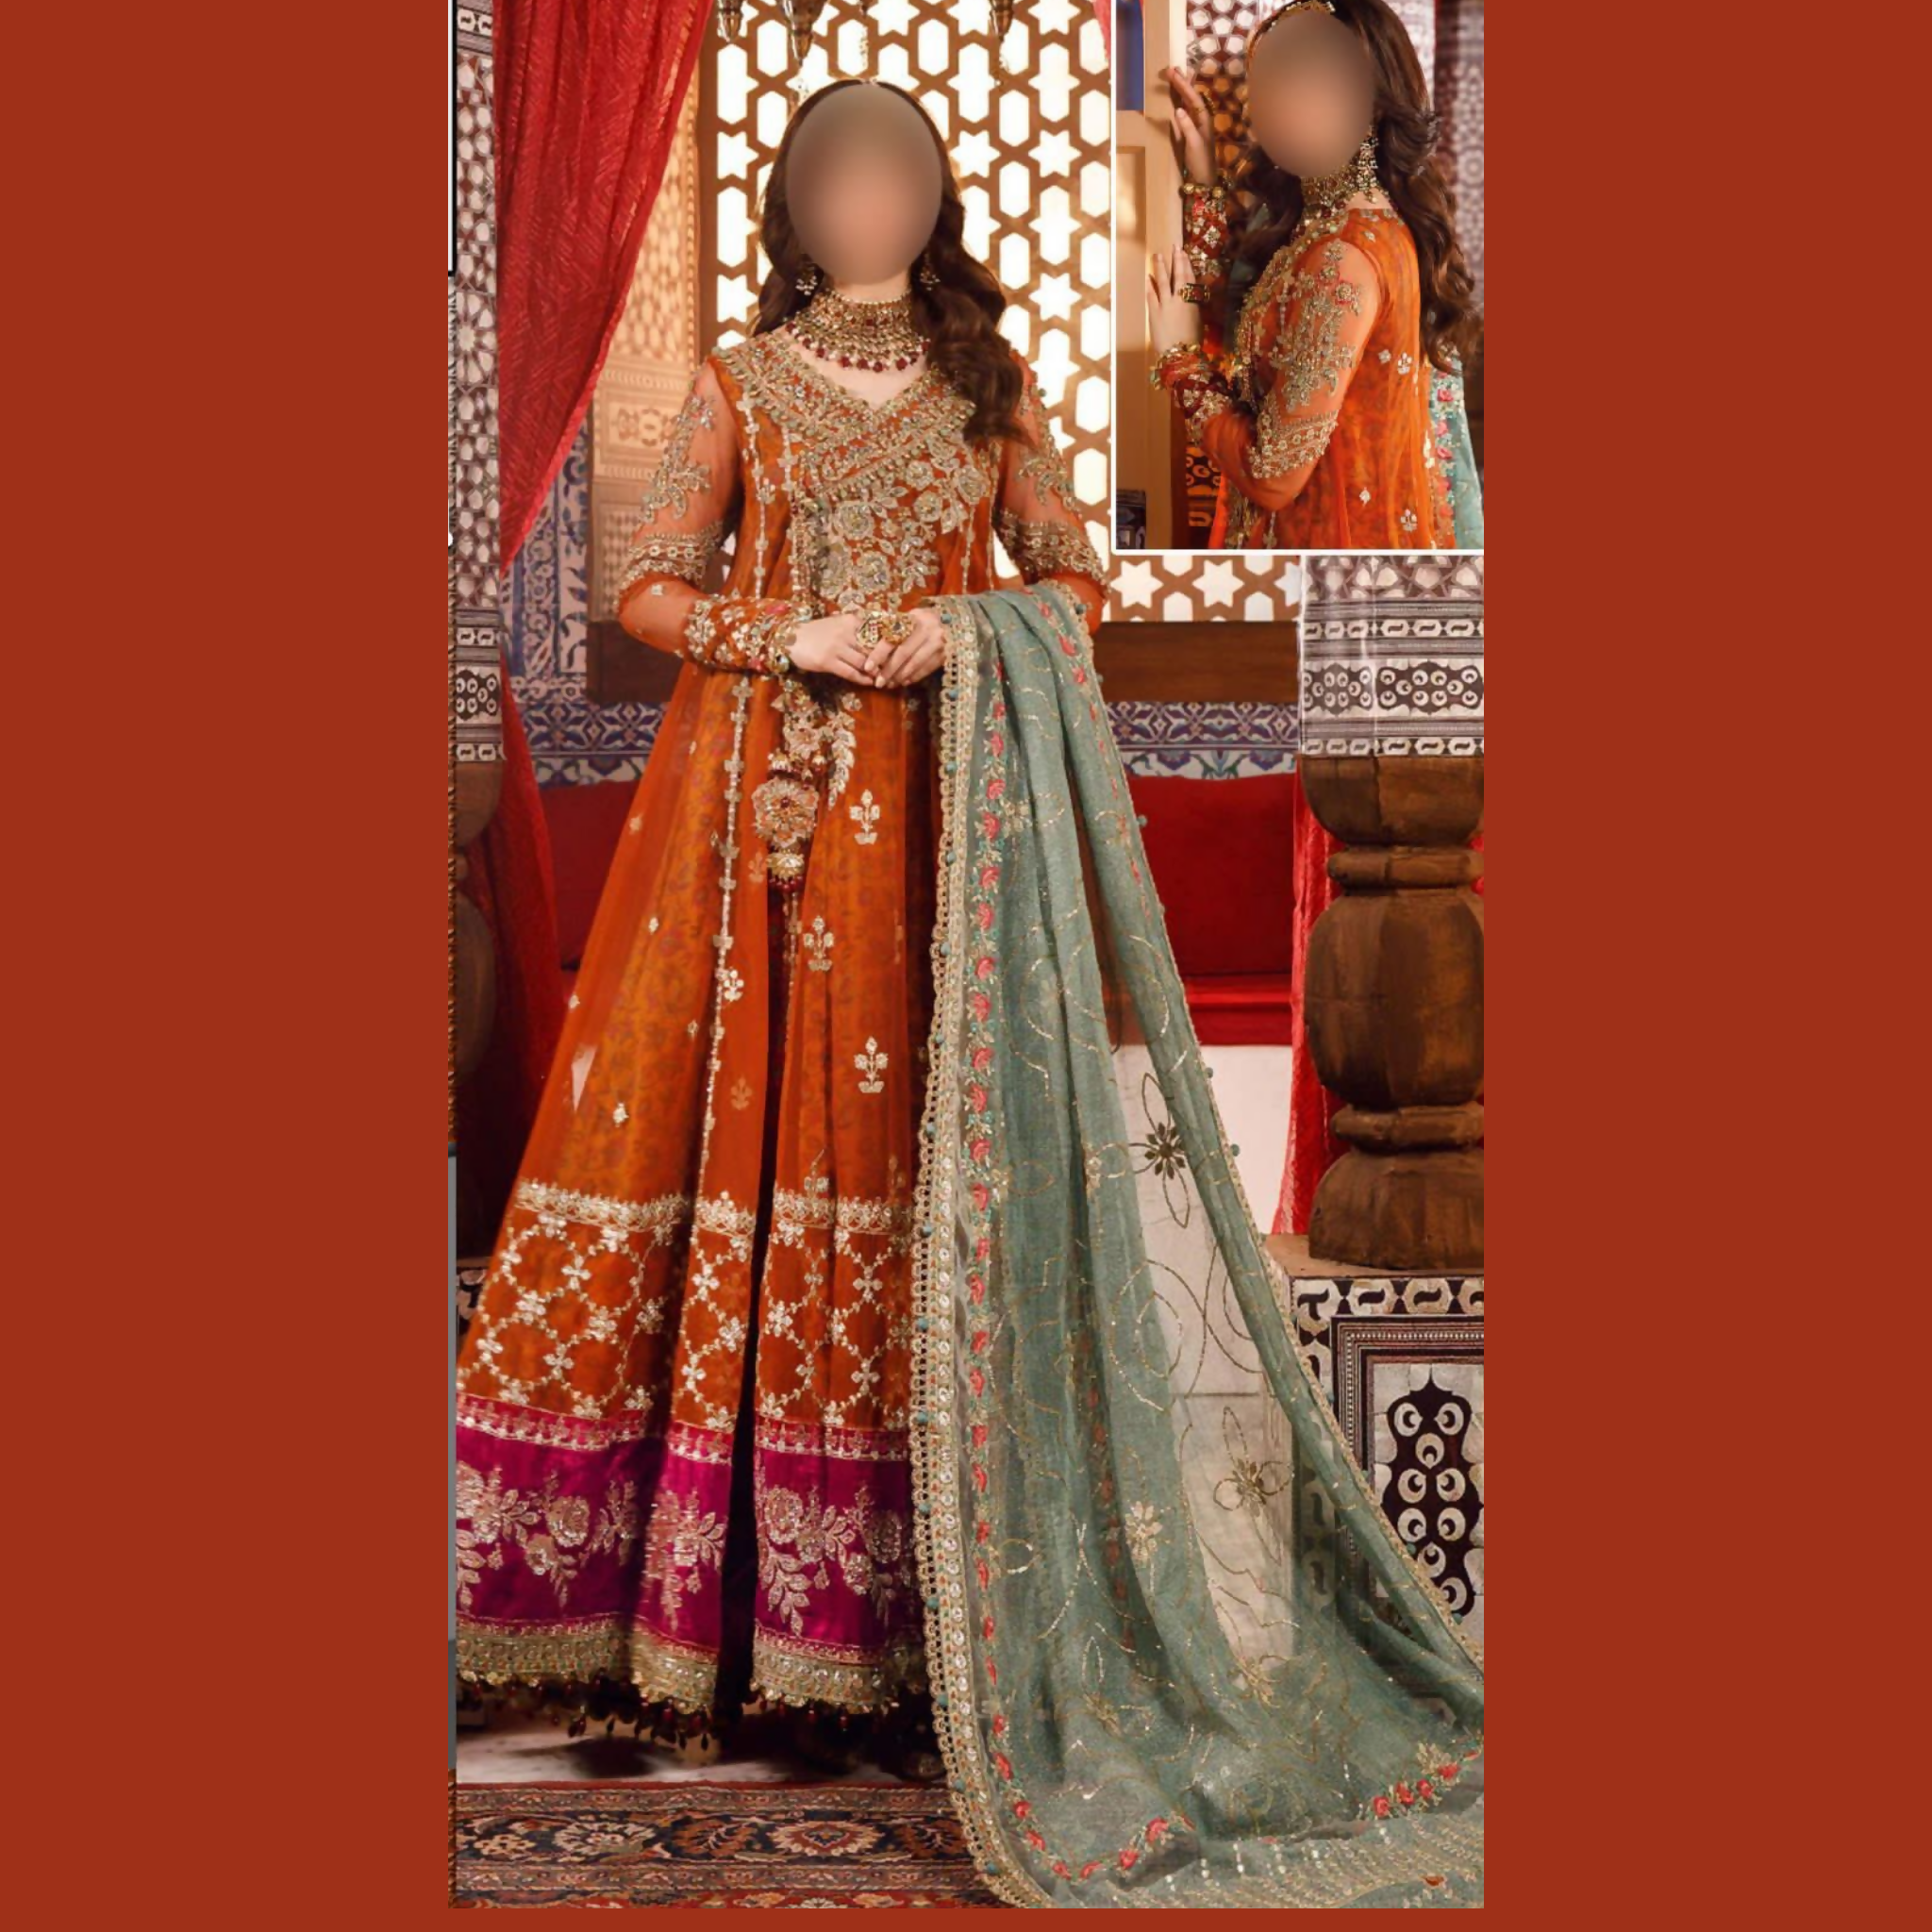 Unstitched Suit, Opulent Embroidered Frock & Silk Trouser Combo, Unstitch Replica, for Ladies